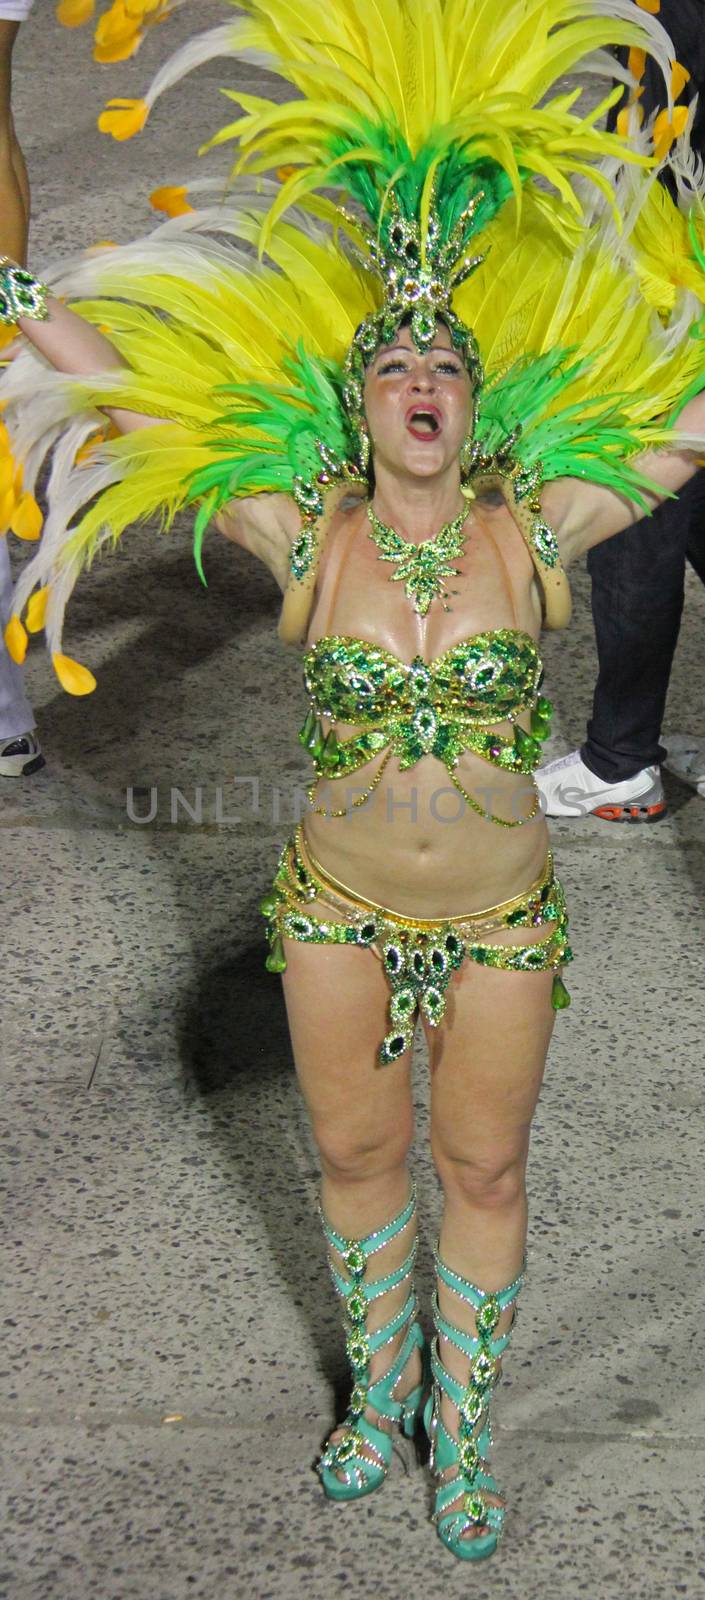 An entertainer performing at a carnaval in Rio de Janeiro, Brazil
03 Mar 2014
No model release
Editorial only